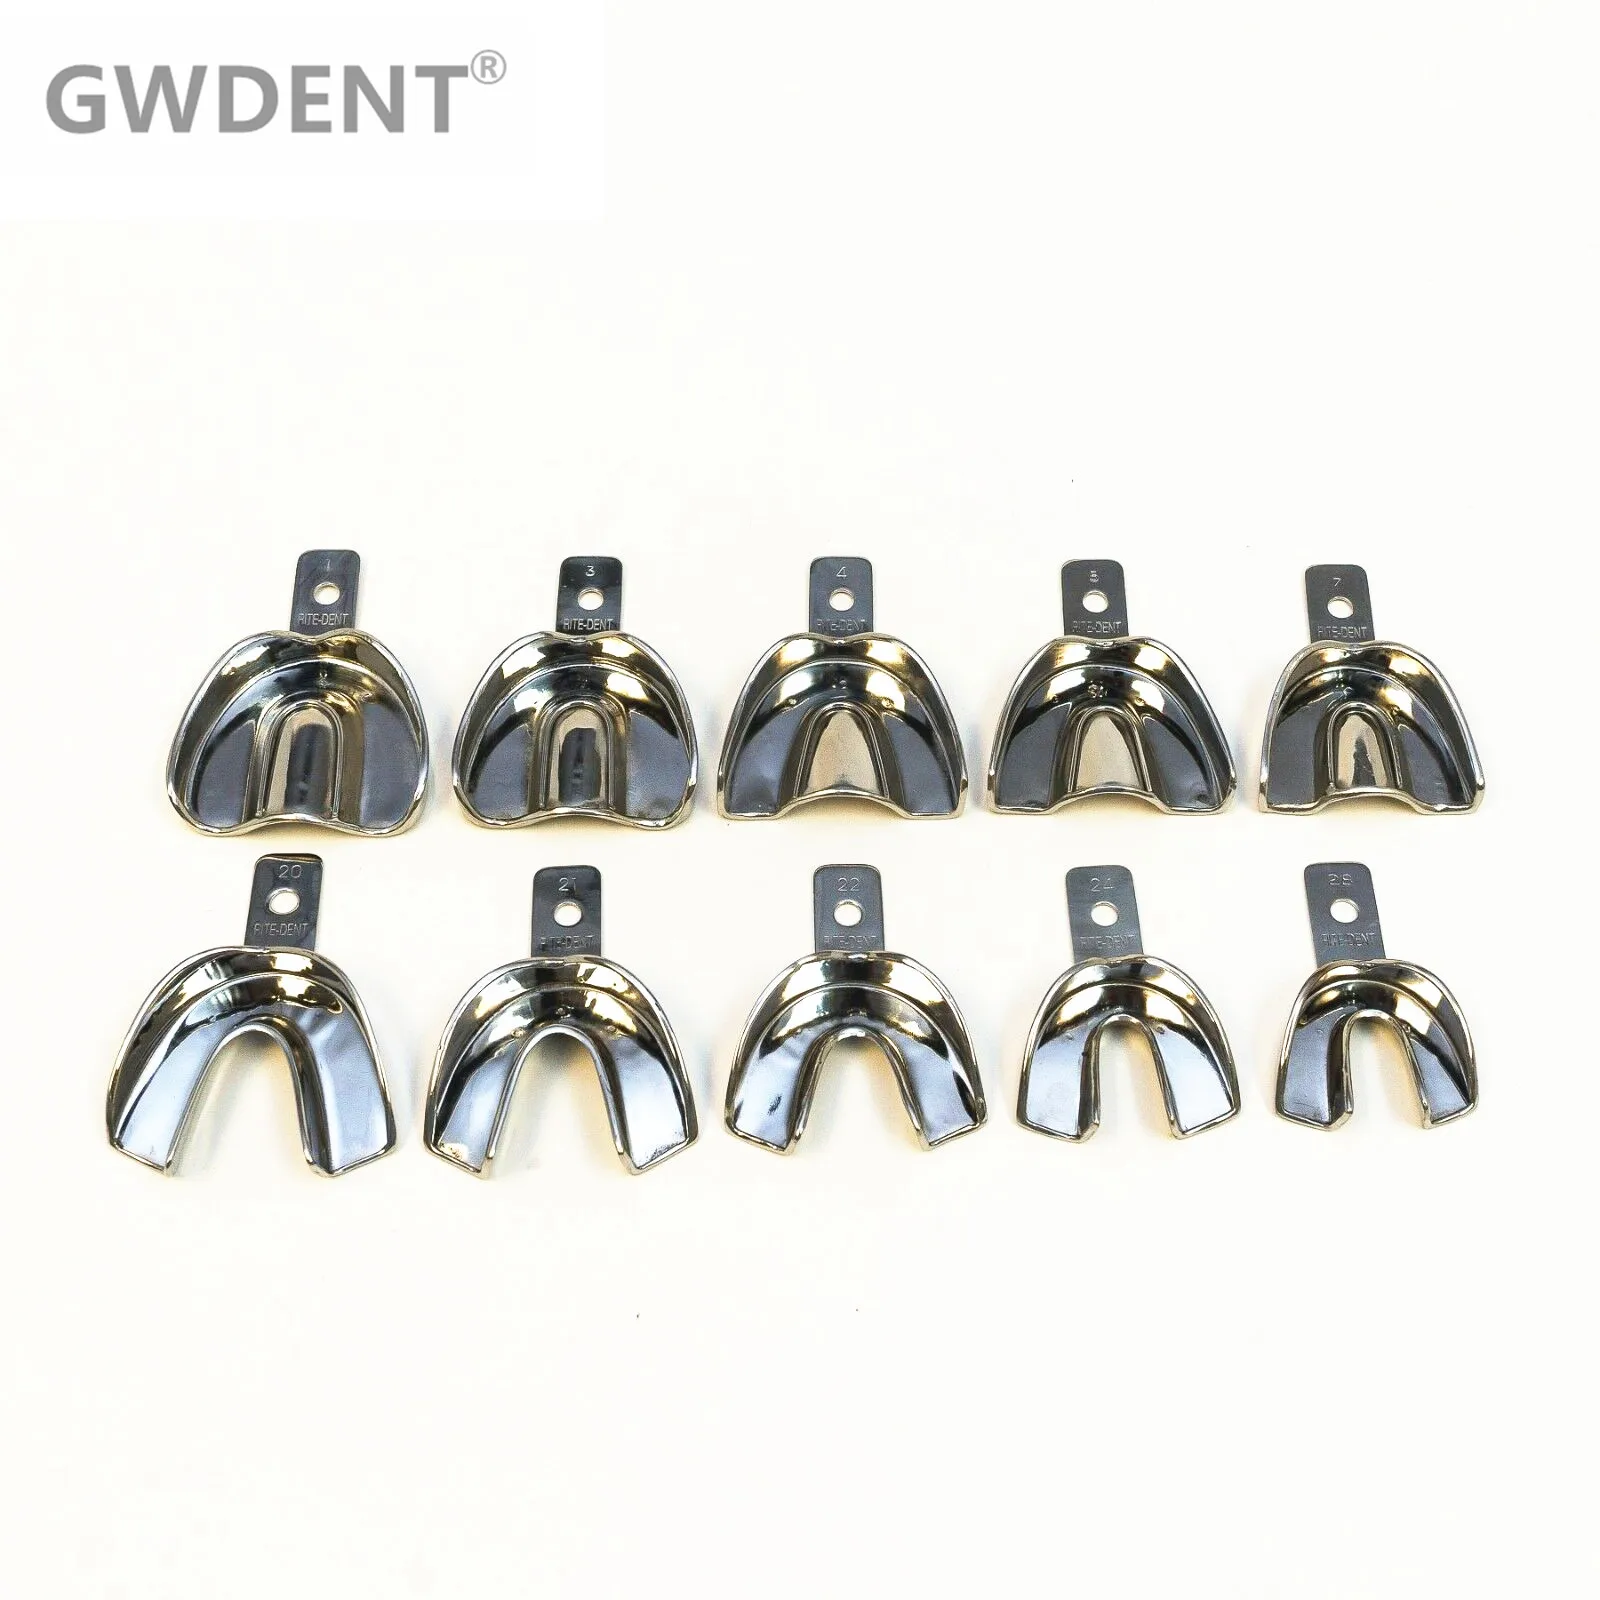 

Dental Impression Stainless Steel Trays Rim Lock Non-Perforated Set of 10Pcs XS.S.M.LXL Upper/Lower